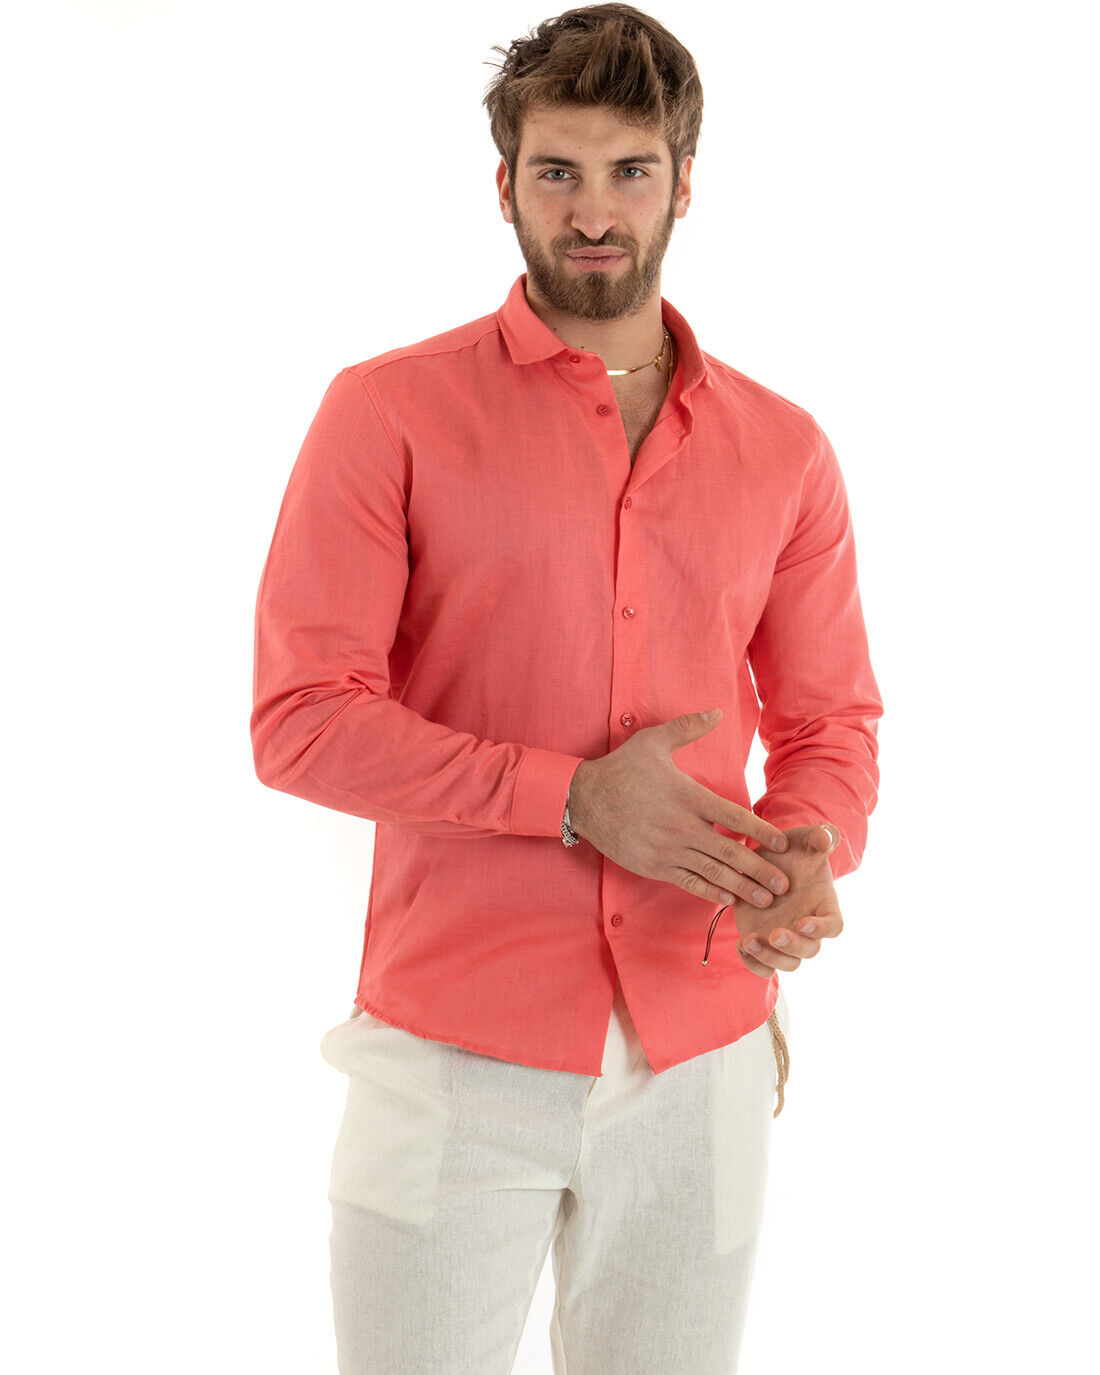 Men's Shirt With Collar Solid Color Coral Linen Long Sleeve Casual Tailored GIOSAL-C2724A